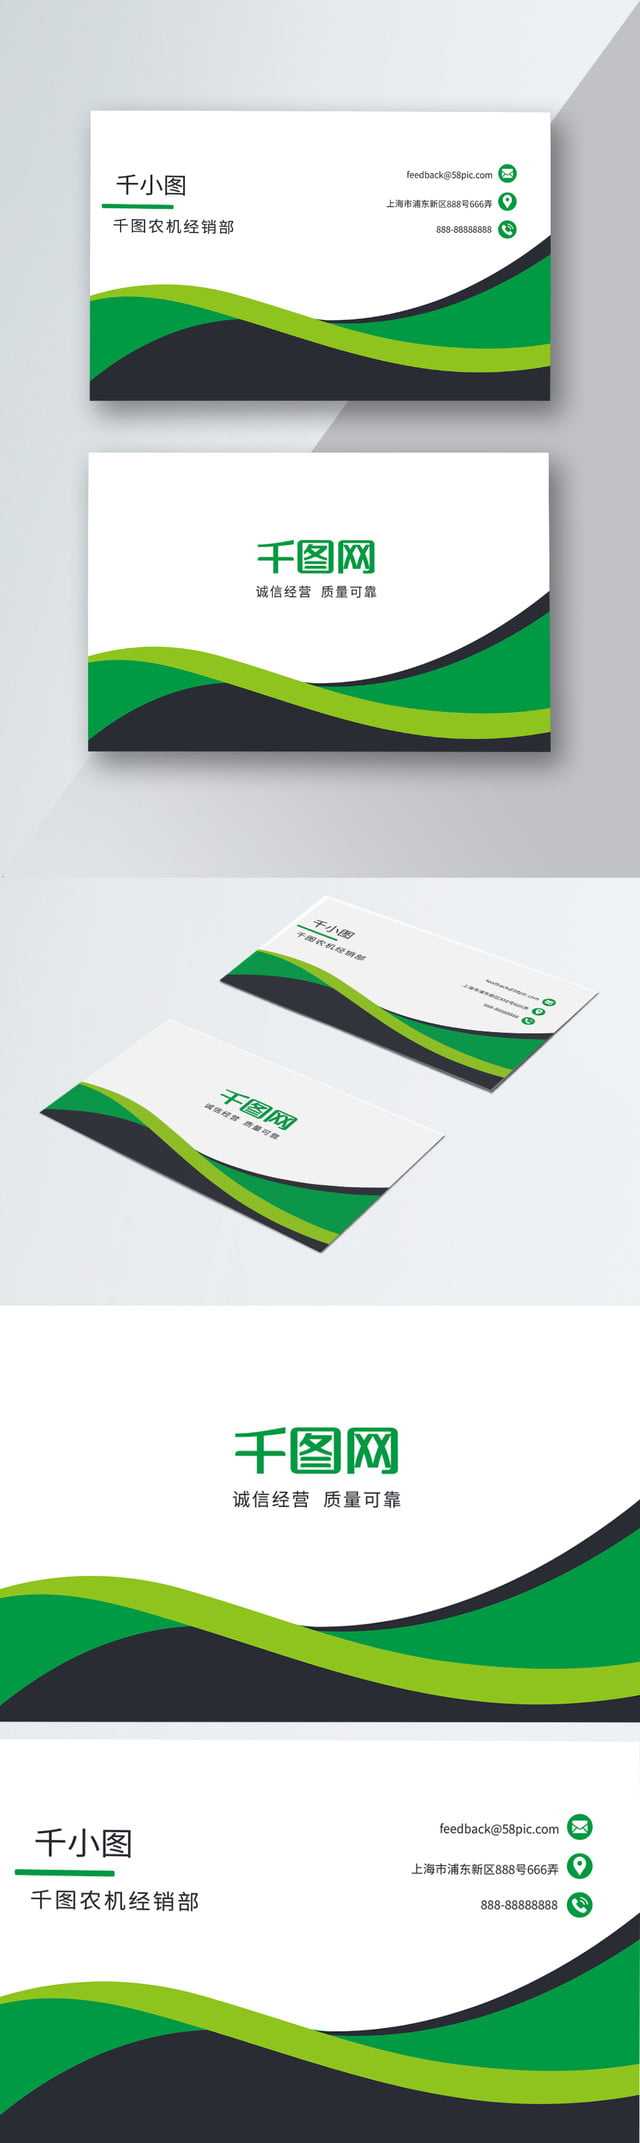 Agricultural Machine Business Card Material Download Inside Download Visiting Card Templates